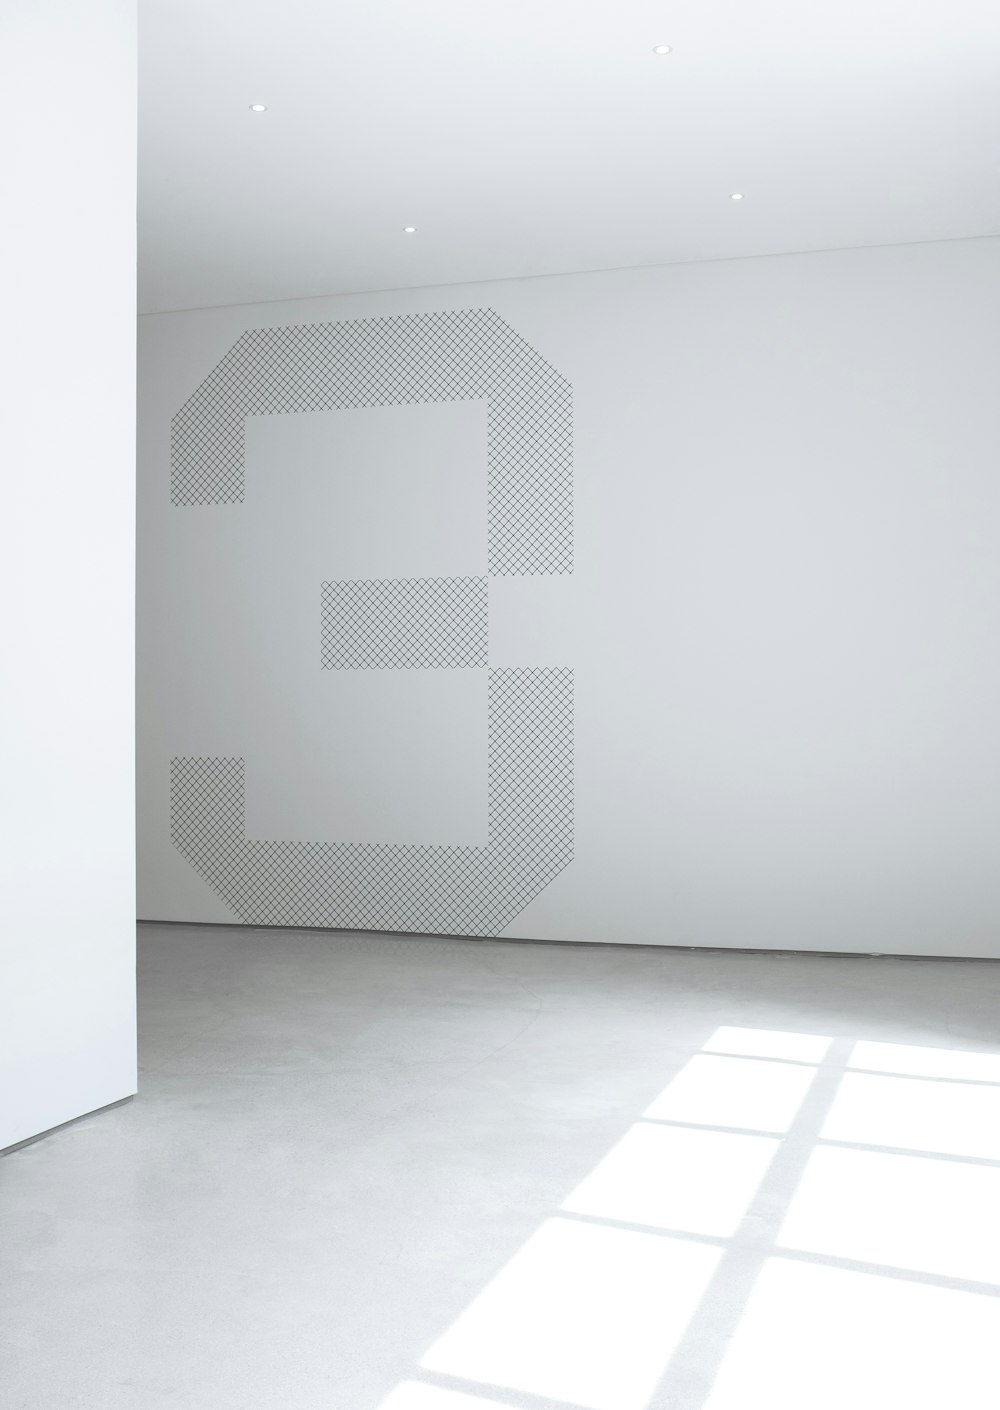 photo of white concrete wall inside room